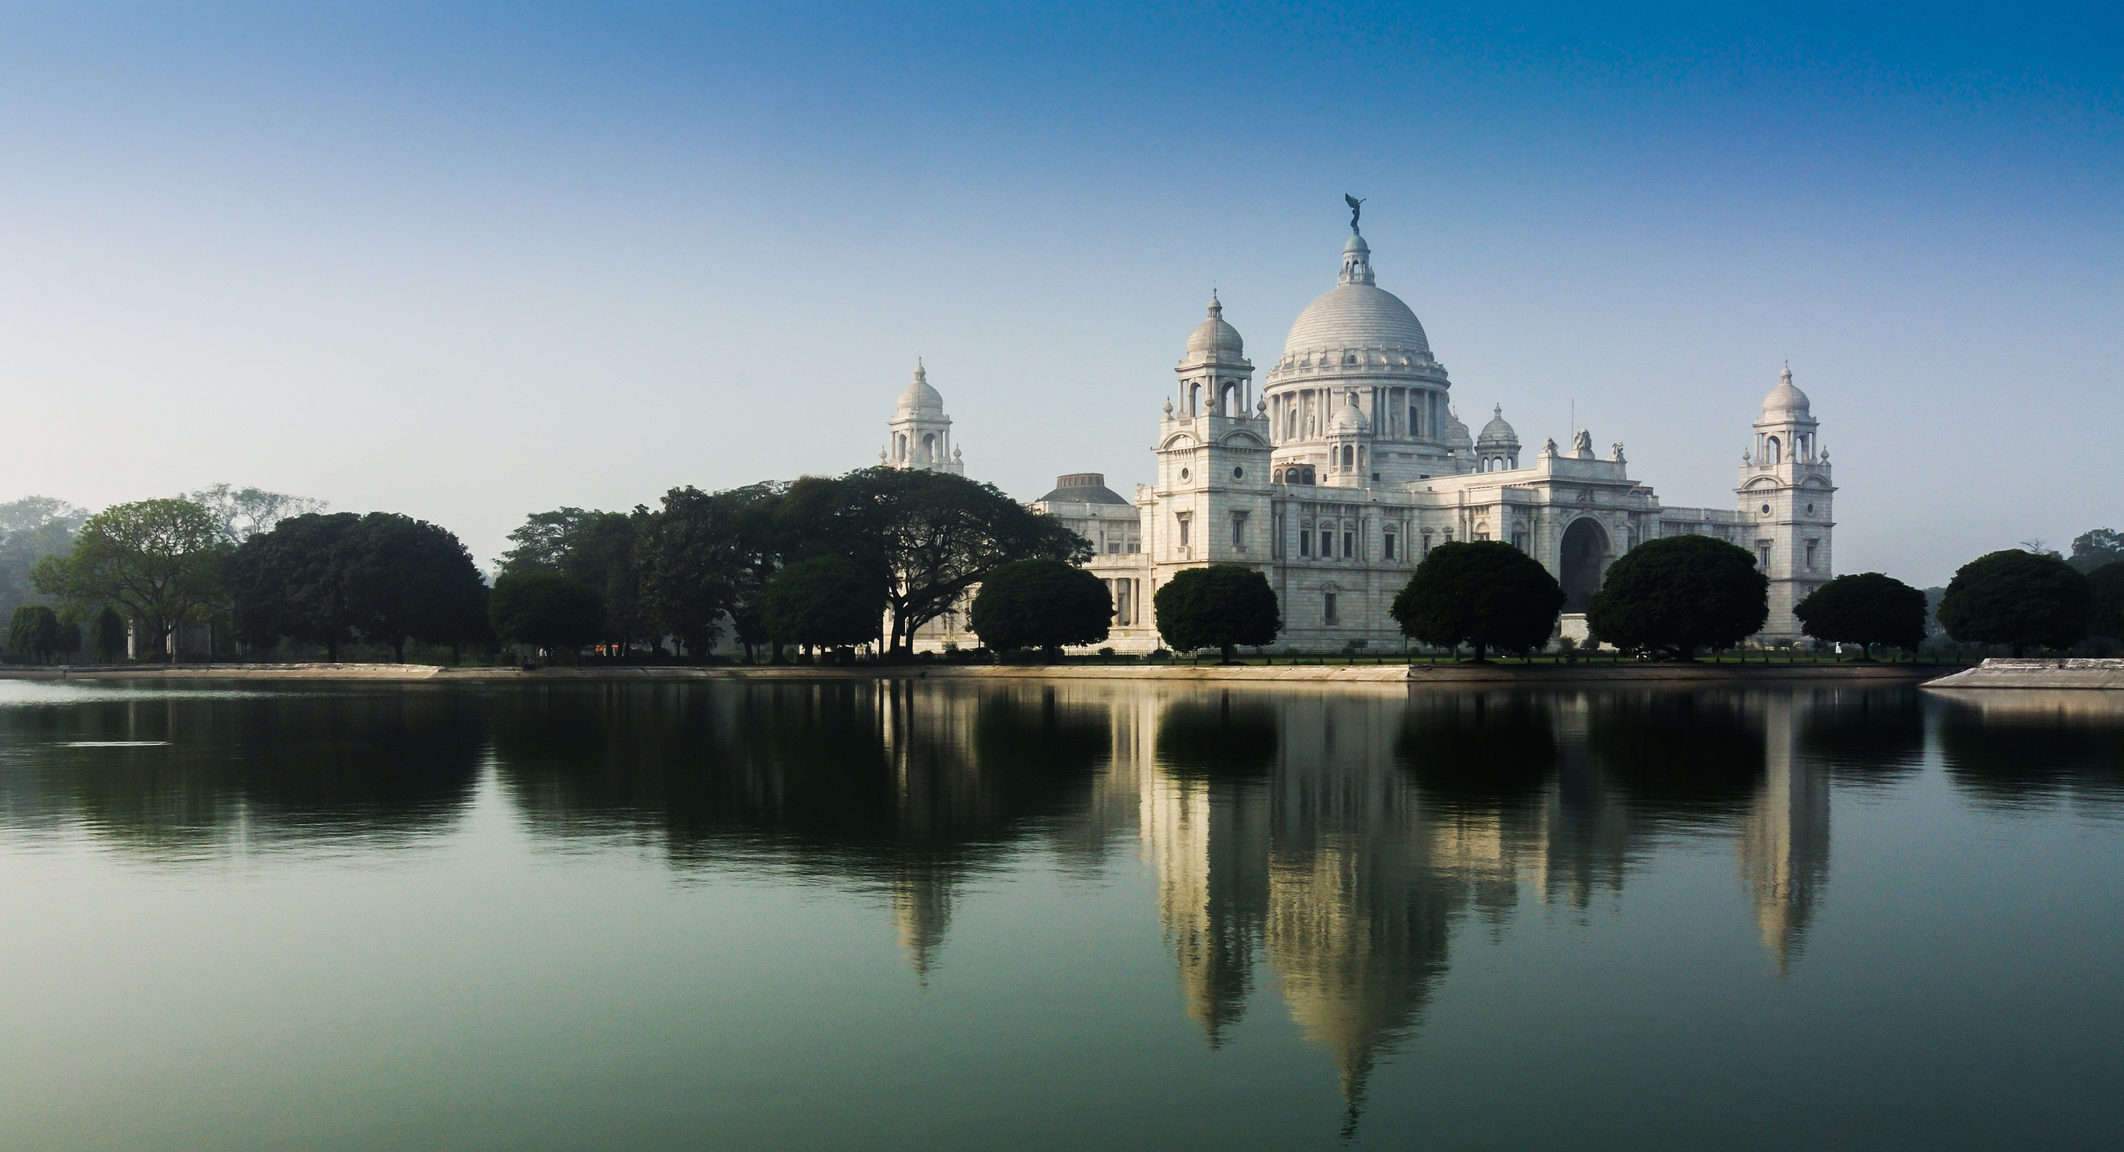 Witness impressive historical architecture like the Victoria Memorial in Kolkata, India when you take a tailor-made holiday with Alfred&.